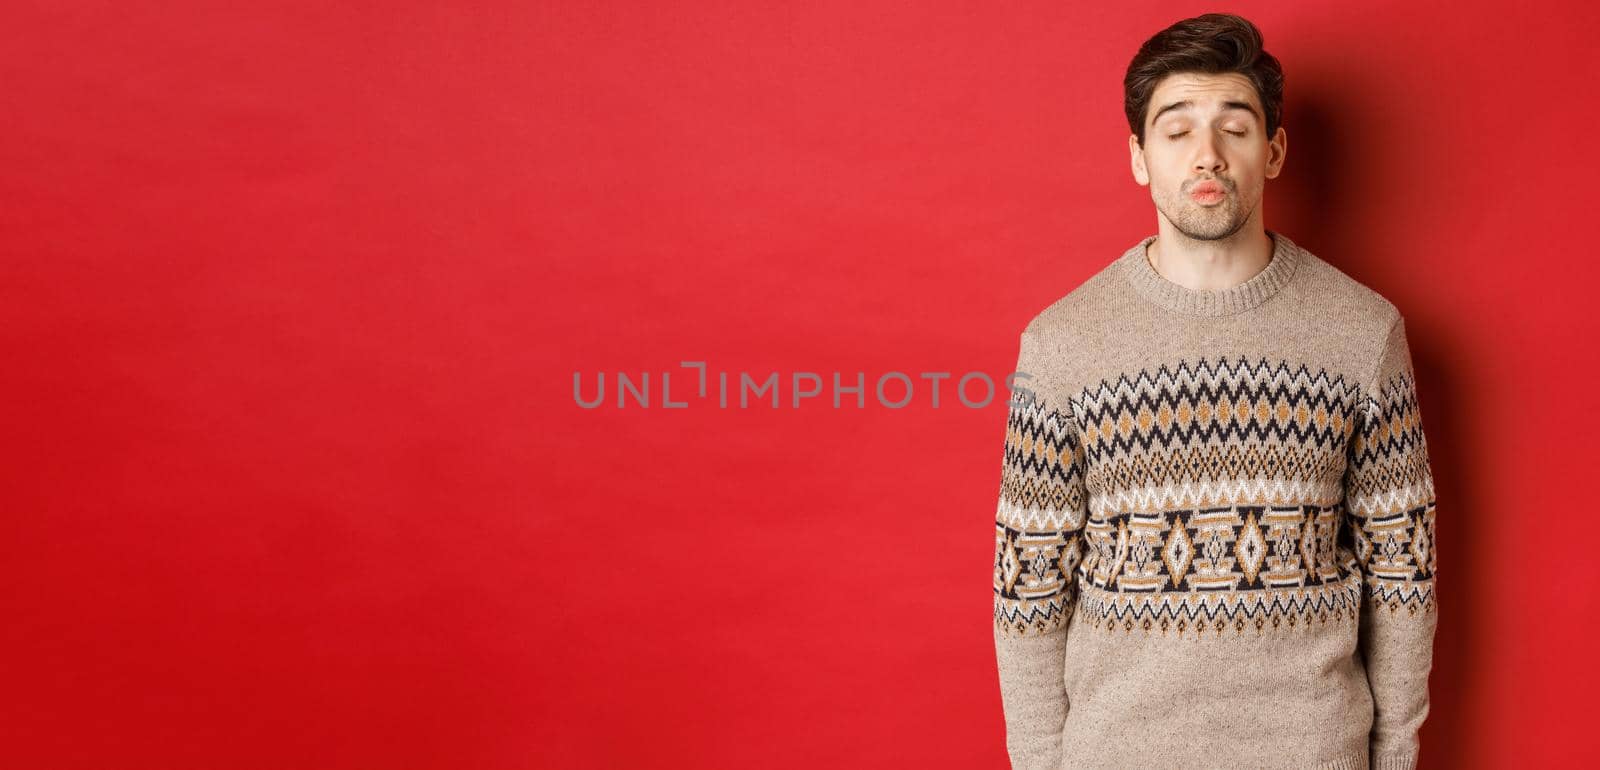 Image of handsome man in christmas sweater pucker lips and close eyes, waiting for kiss under mistletoe, standing over red background.